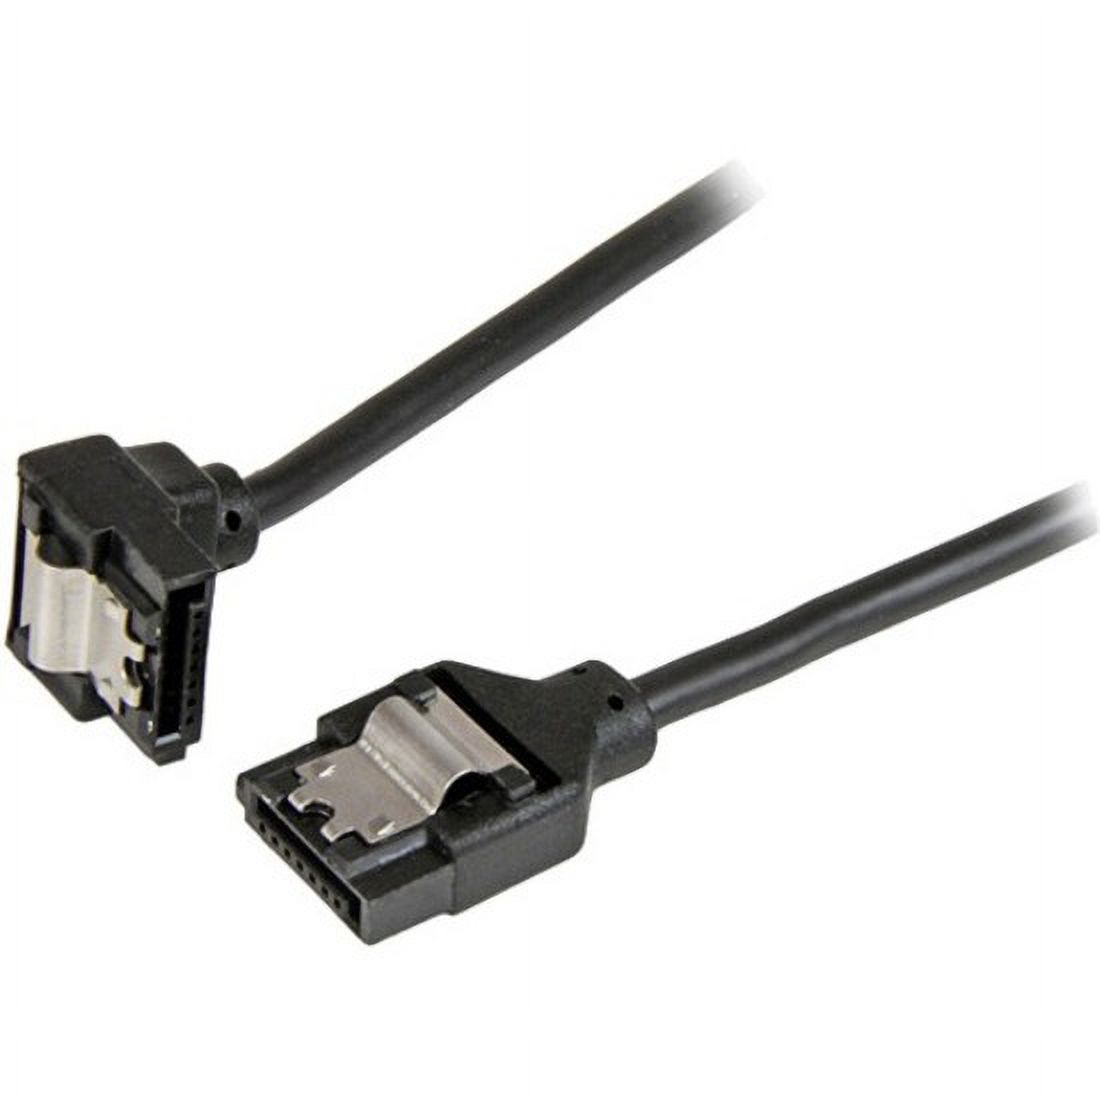 STARTECH.COM LSATARND12R1 12IN LATCHING ROUND SATA CABLE - image 1 of 3